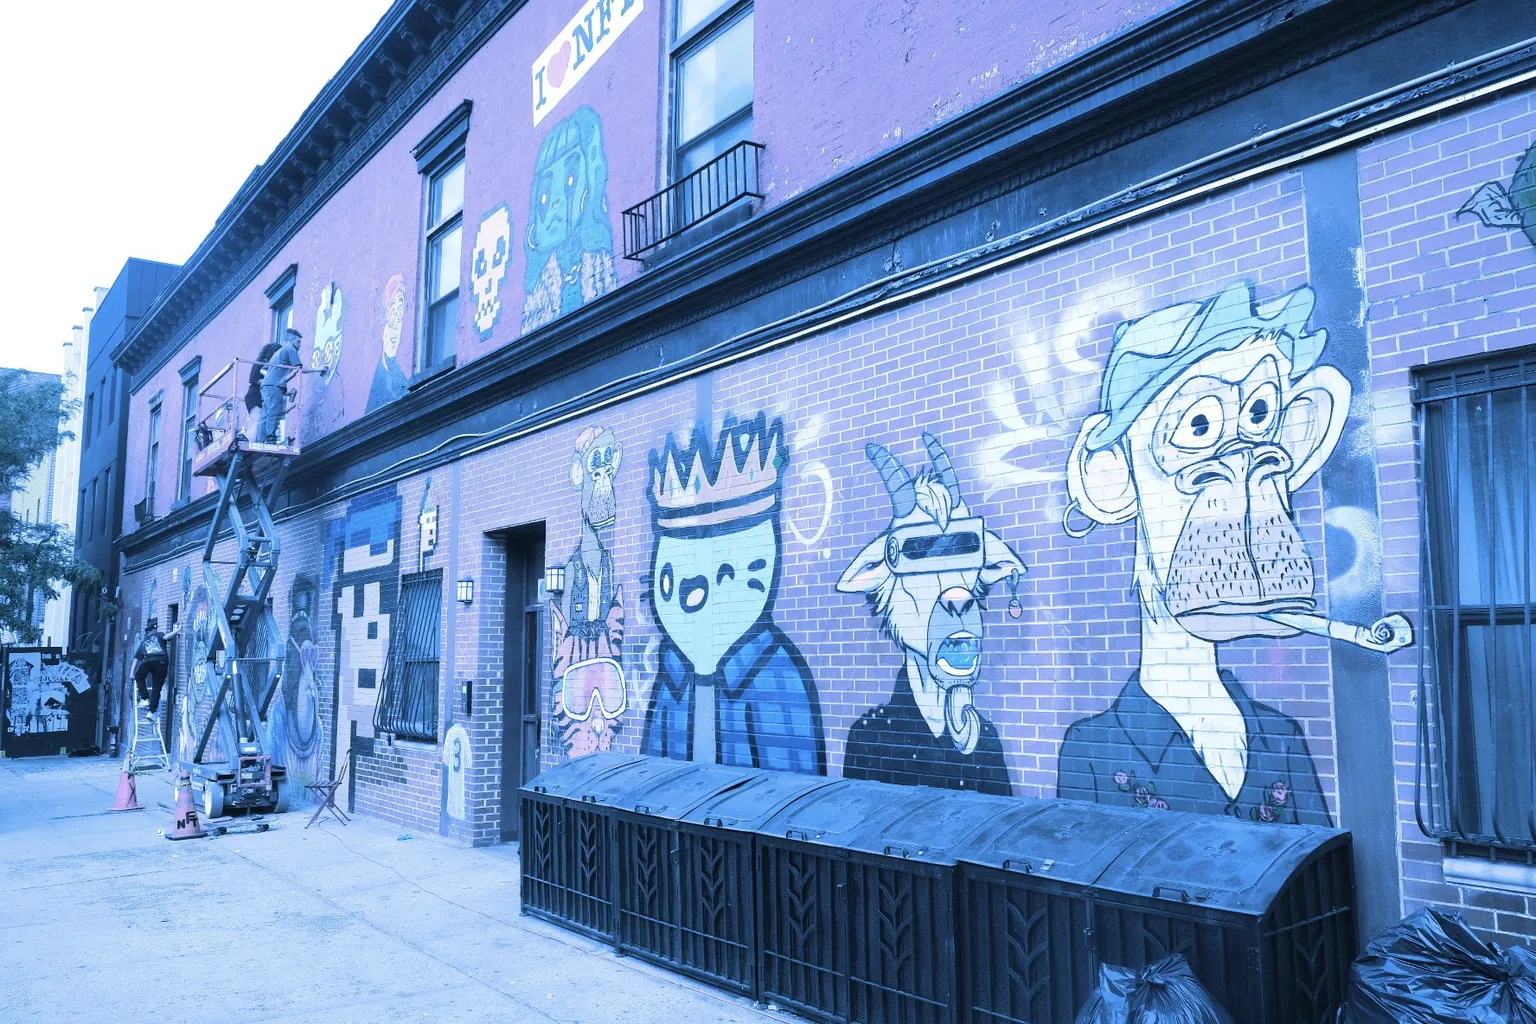 Some of the most recognizable NFT collections in a mural in New York by graffiti artist Masnah. (Photo: André Beganski / Decrypt)